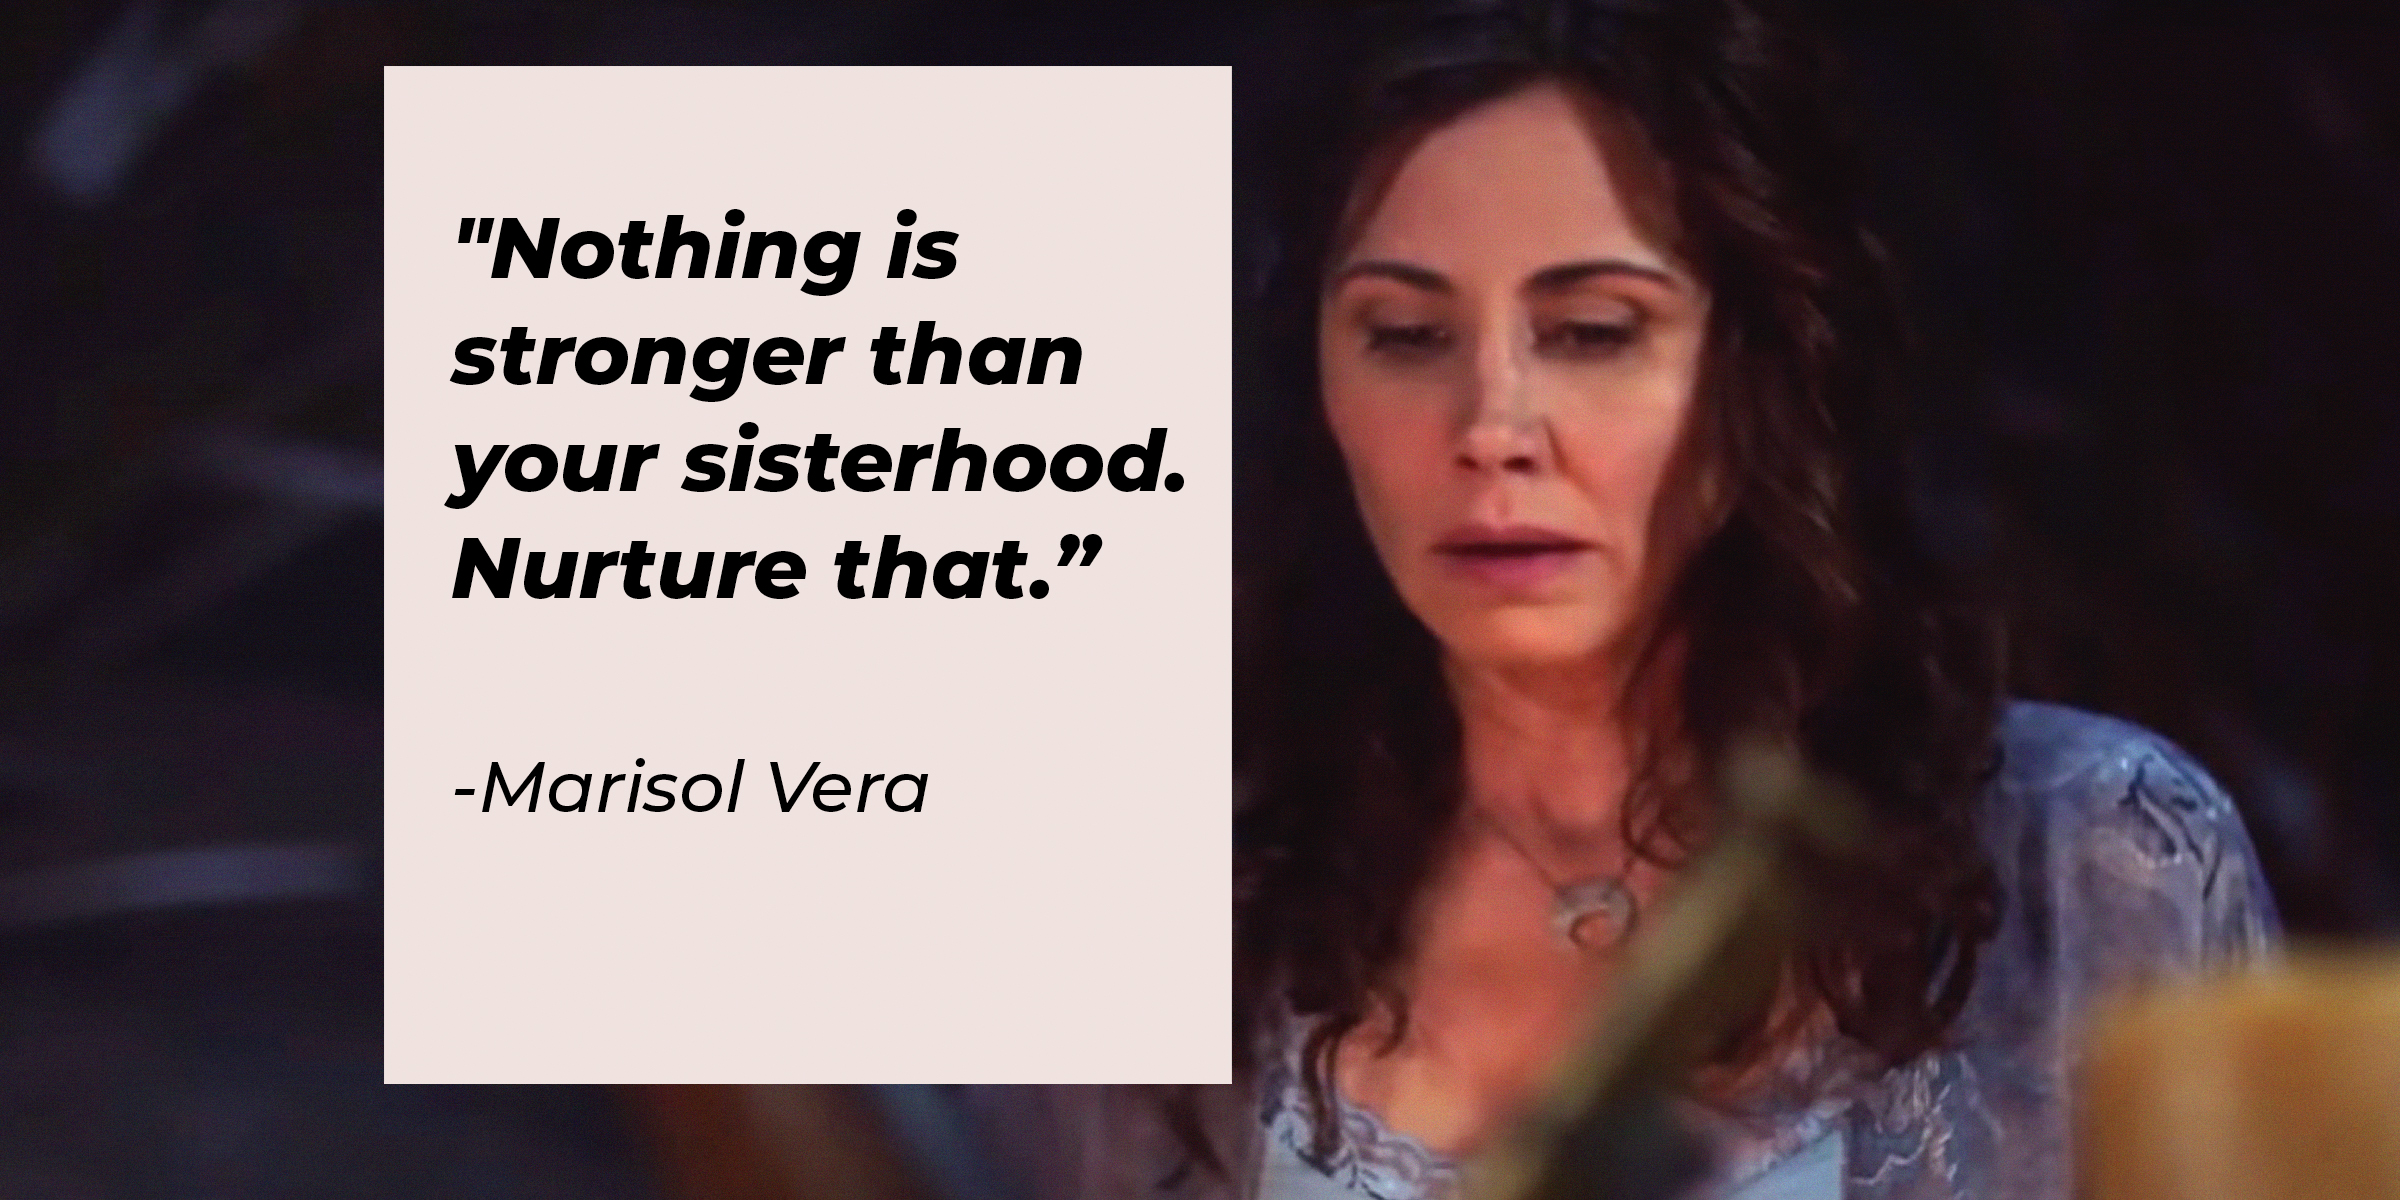 An image of Marisol Vera with her quote: "Nothing is stronger than your sisterhood. Nurture that.” │Source: facebook.com/charmedtv